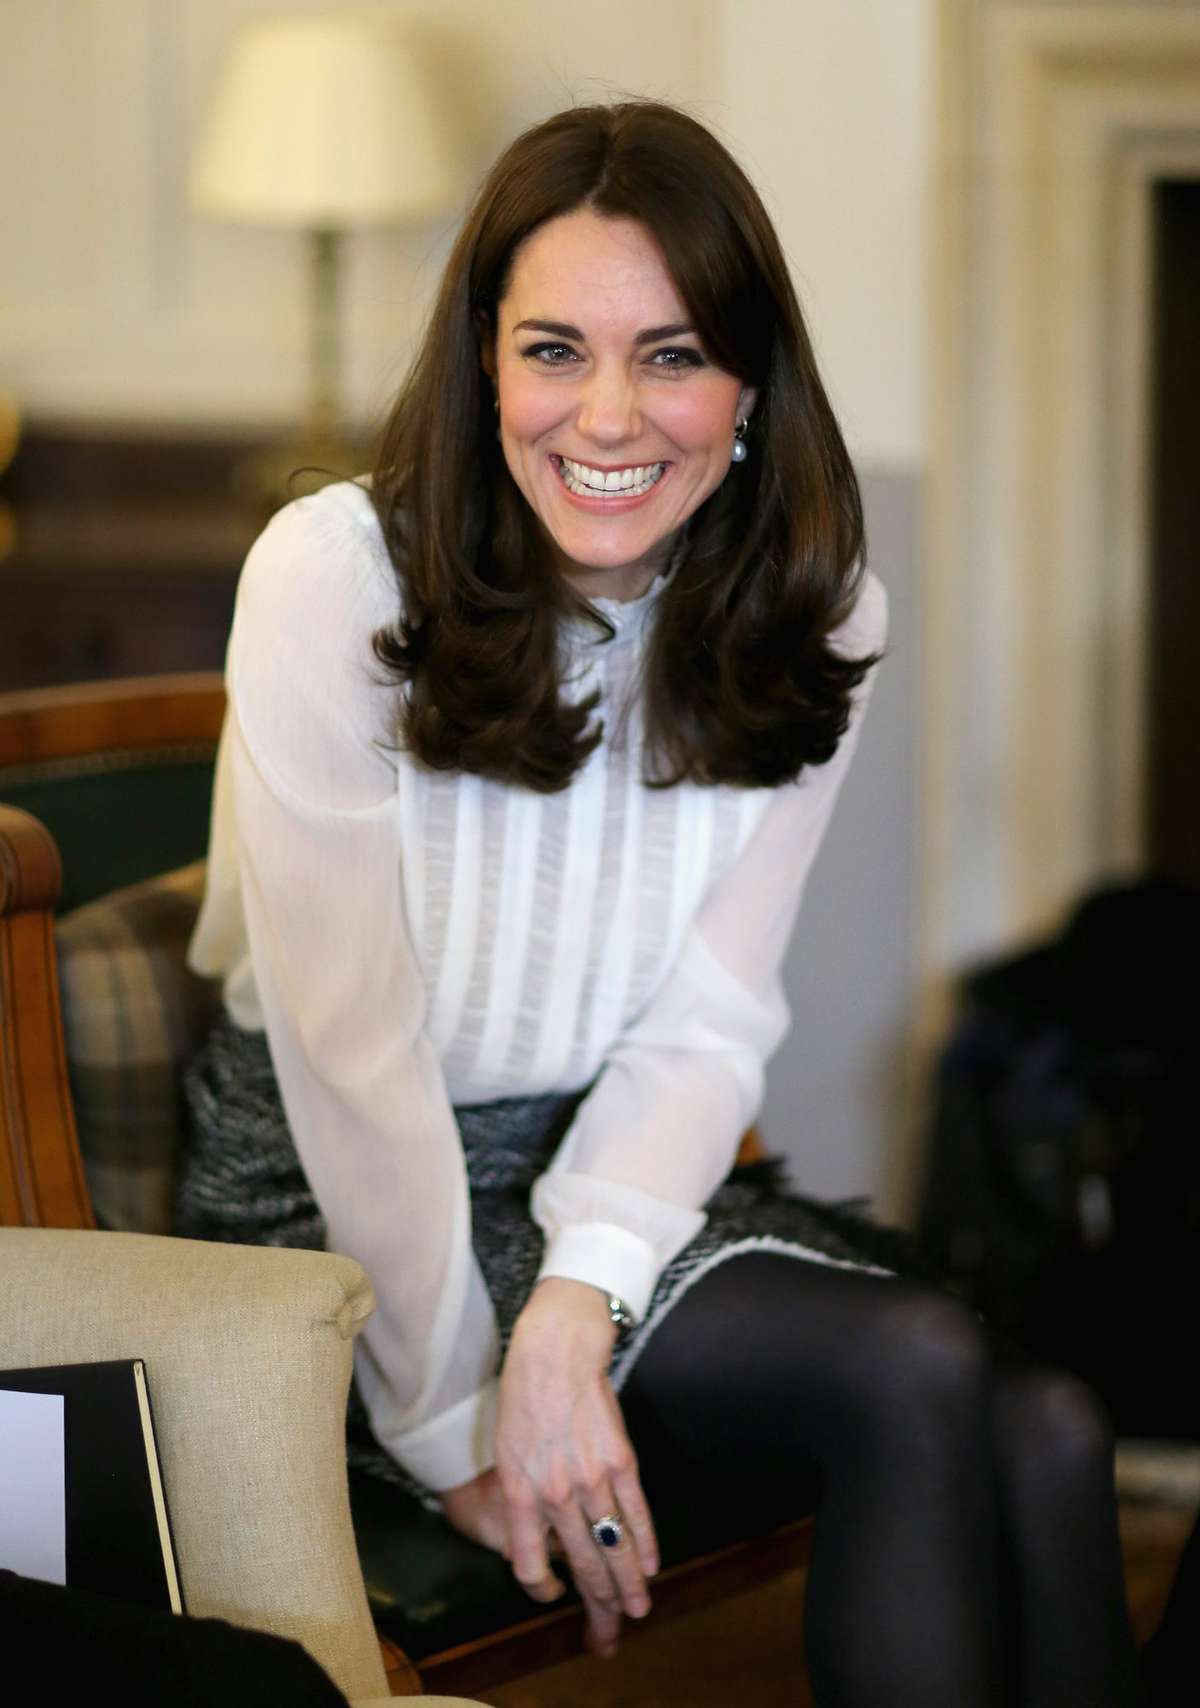 Kate Middleton in college lead